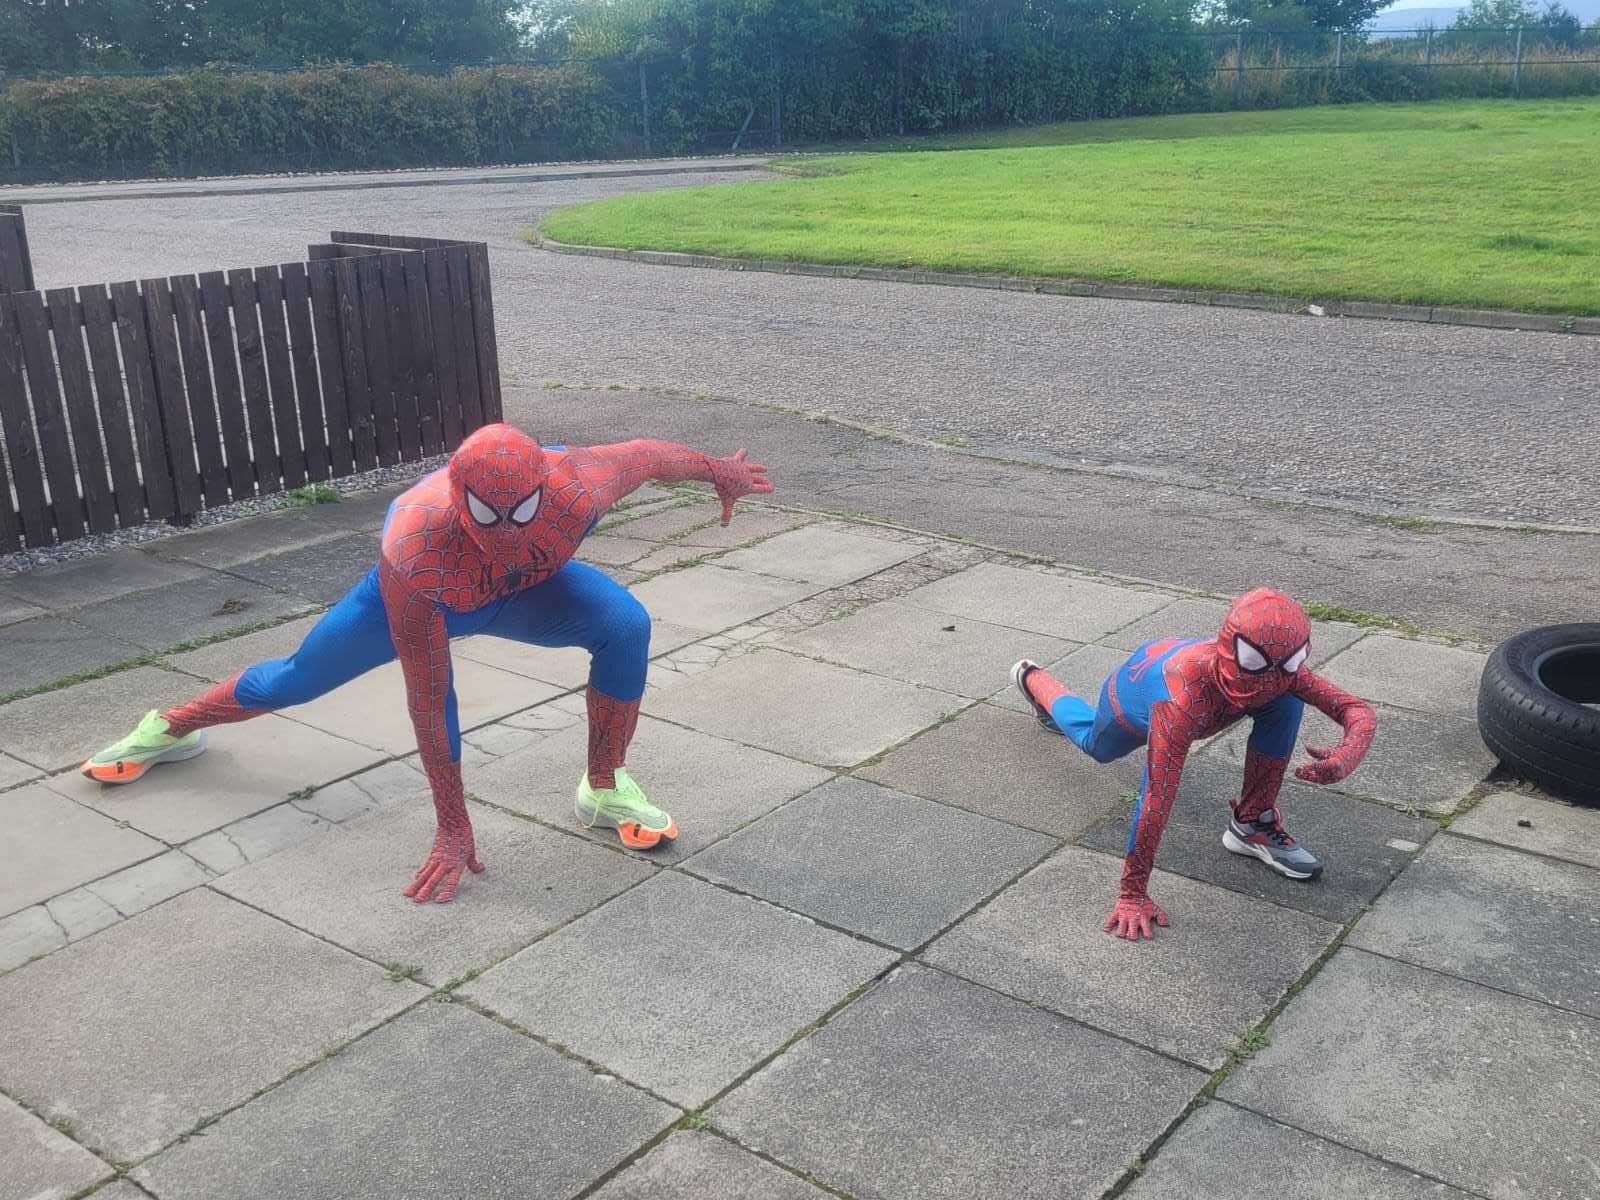 Andrew and his son Devyn (7) dressed up as Spiderman ready for Nairn Highland Games.